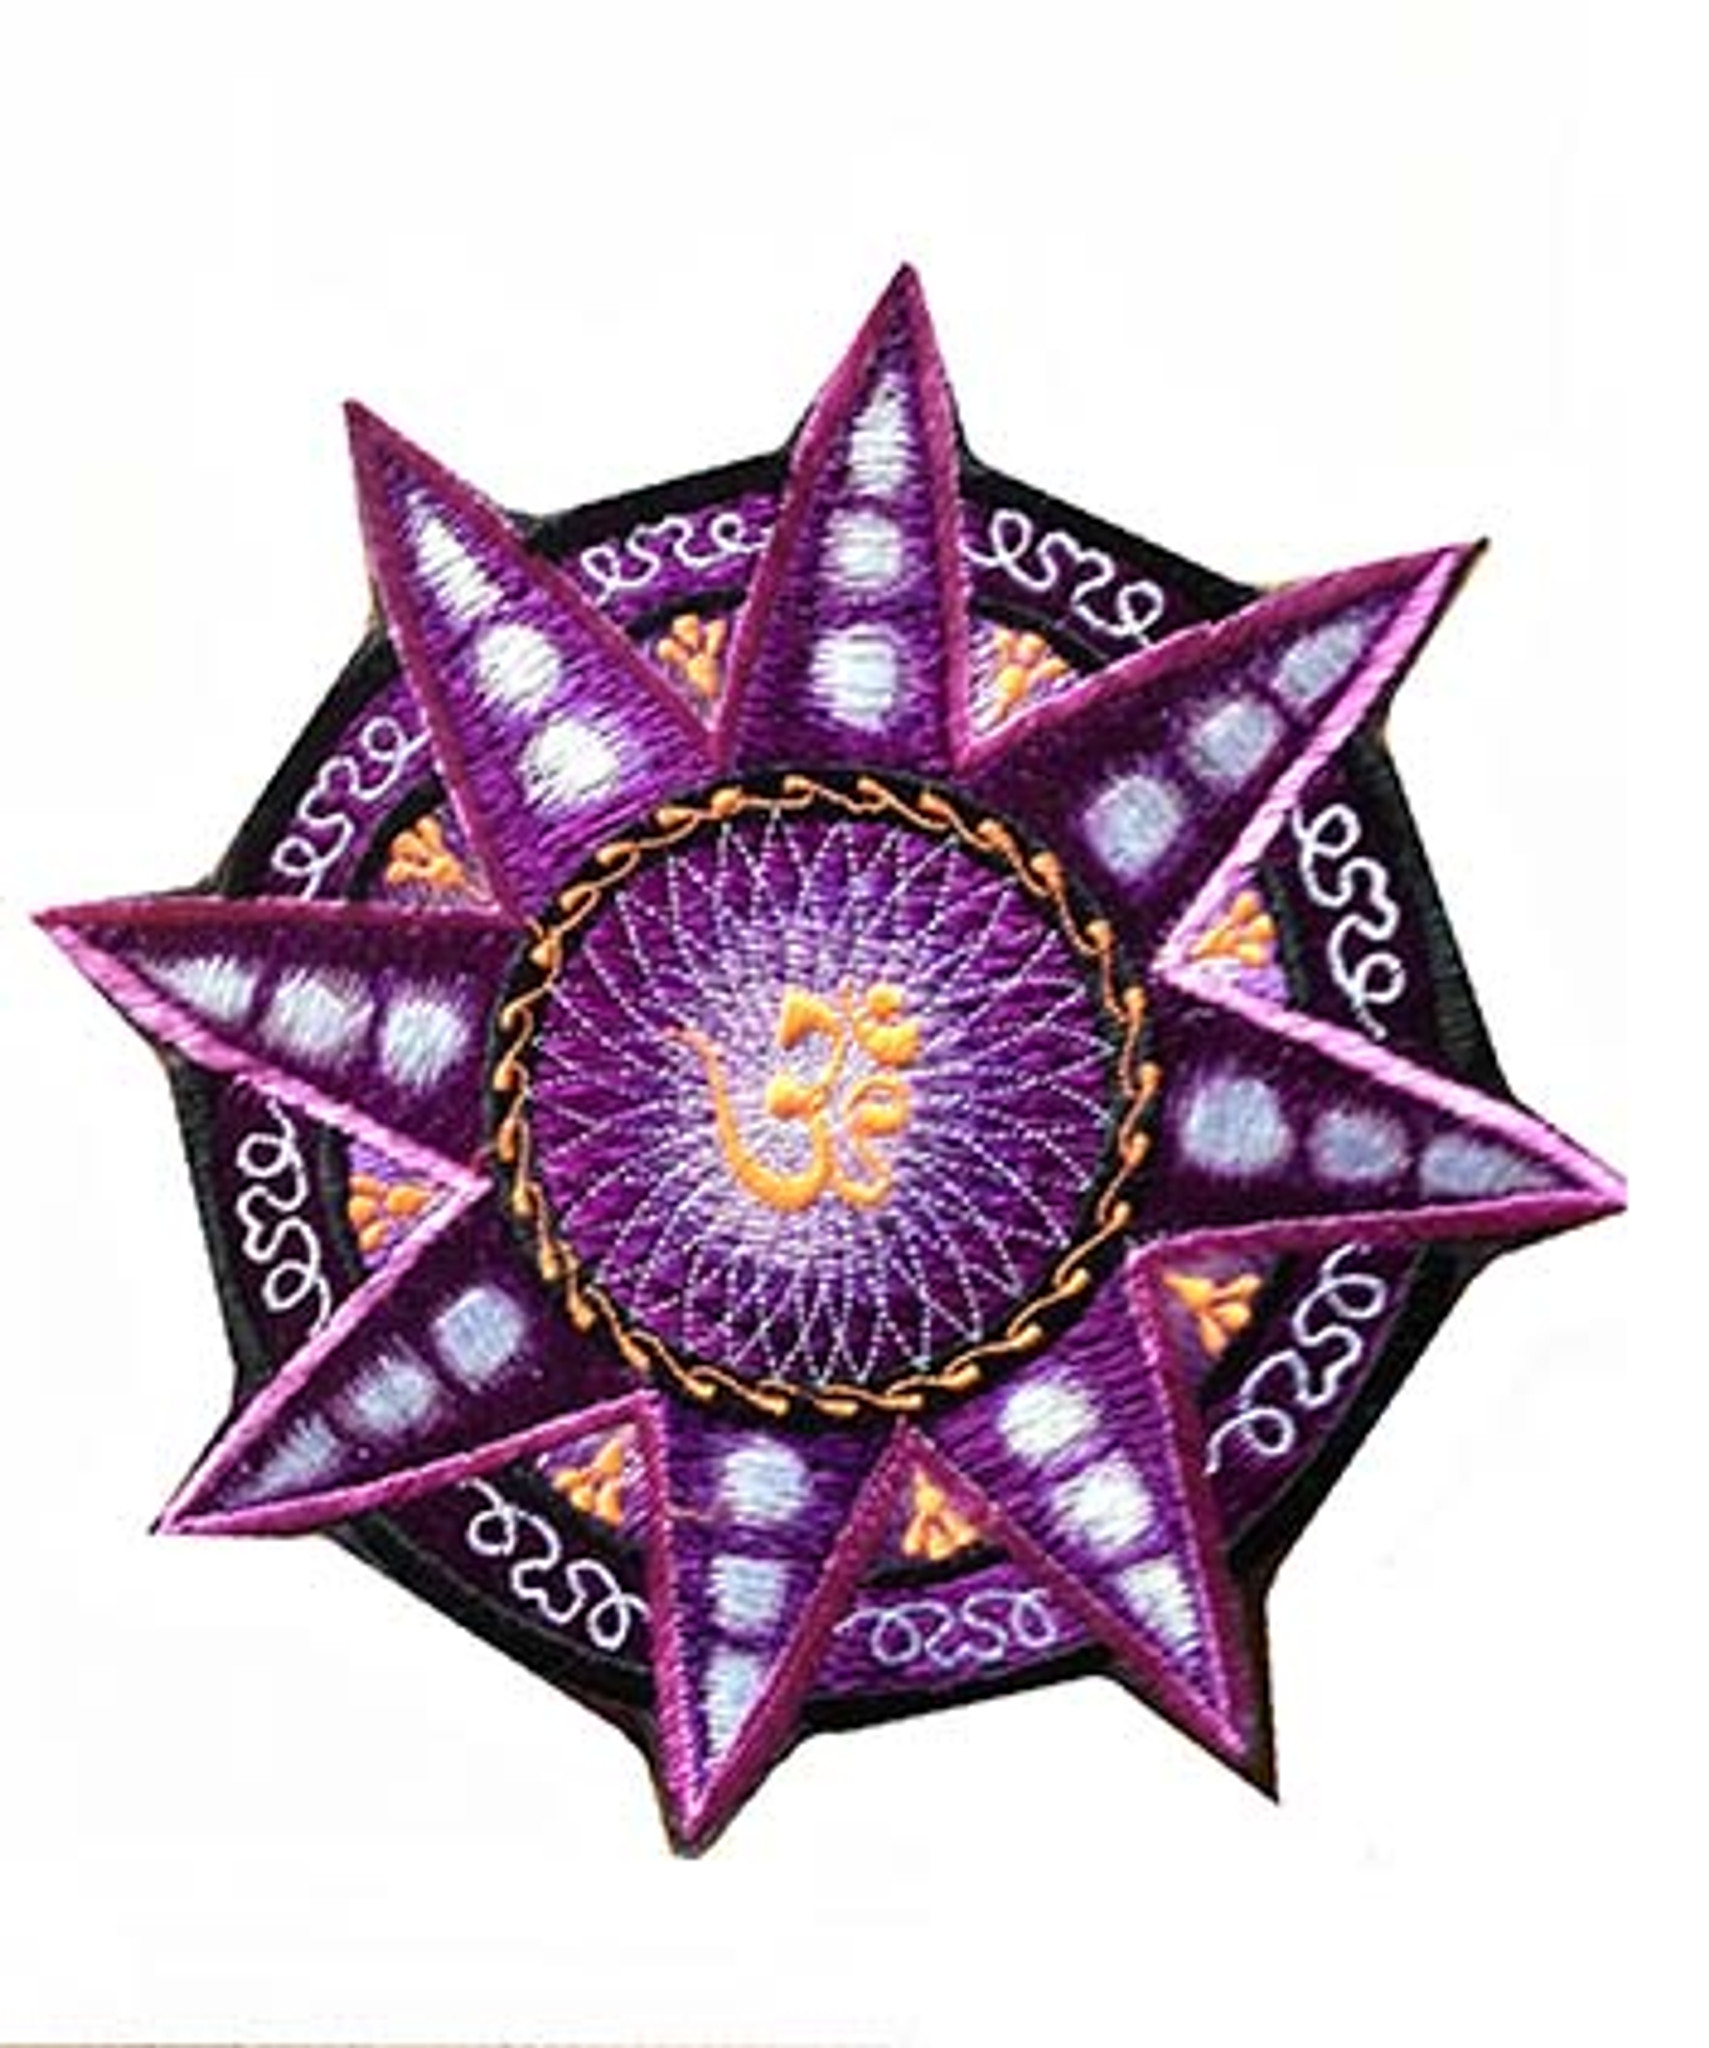 Medium star embroidered patch (6 inches)